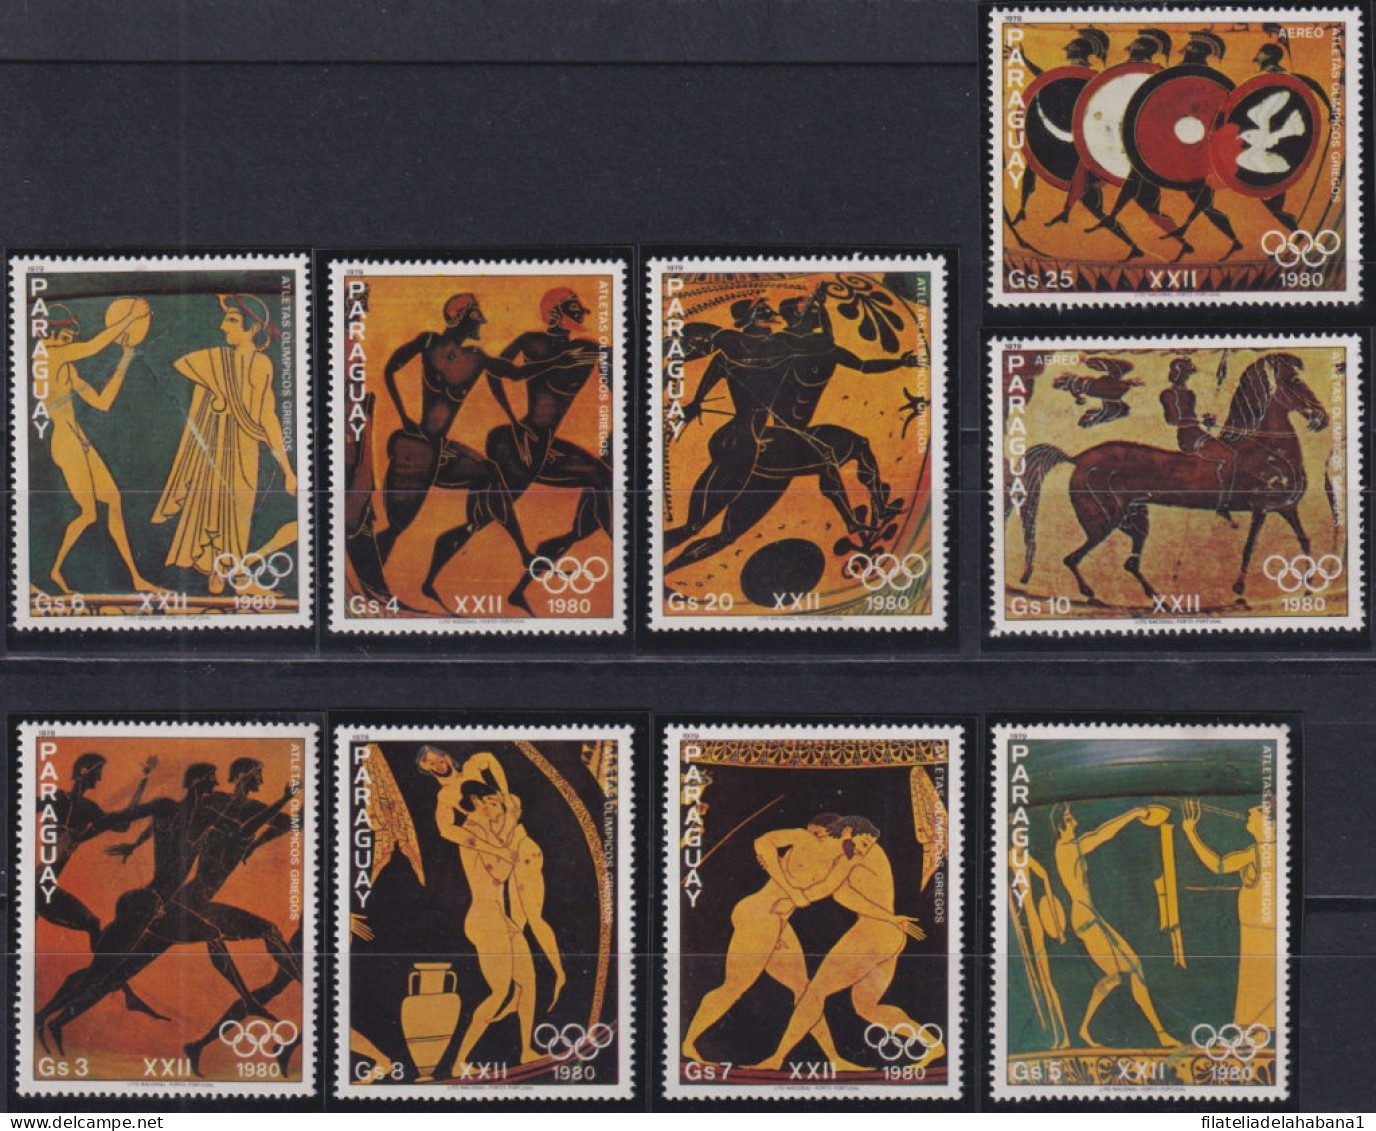 F-EX49811 PARAGUAY MNH 1980 OLYMPIC GAMES ARCHEOLOGY GREECE DRAWING SPORT.  - Sommer 1980: Moskau